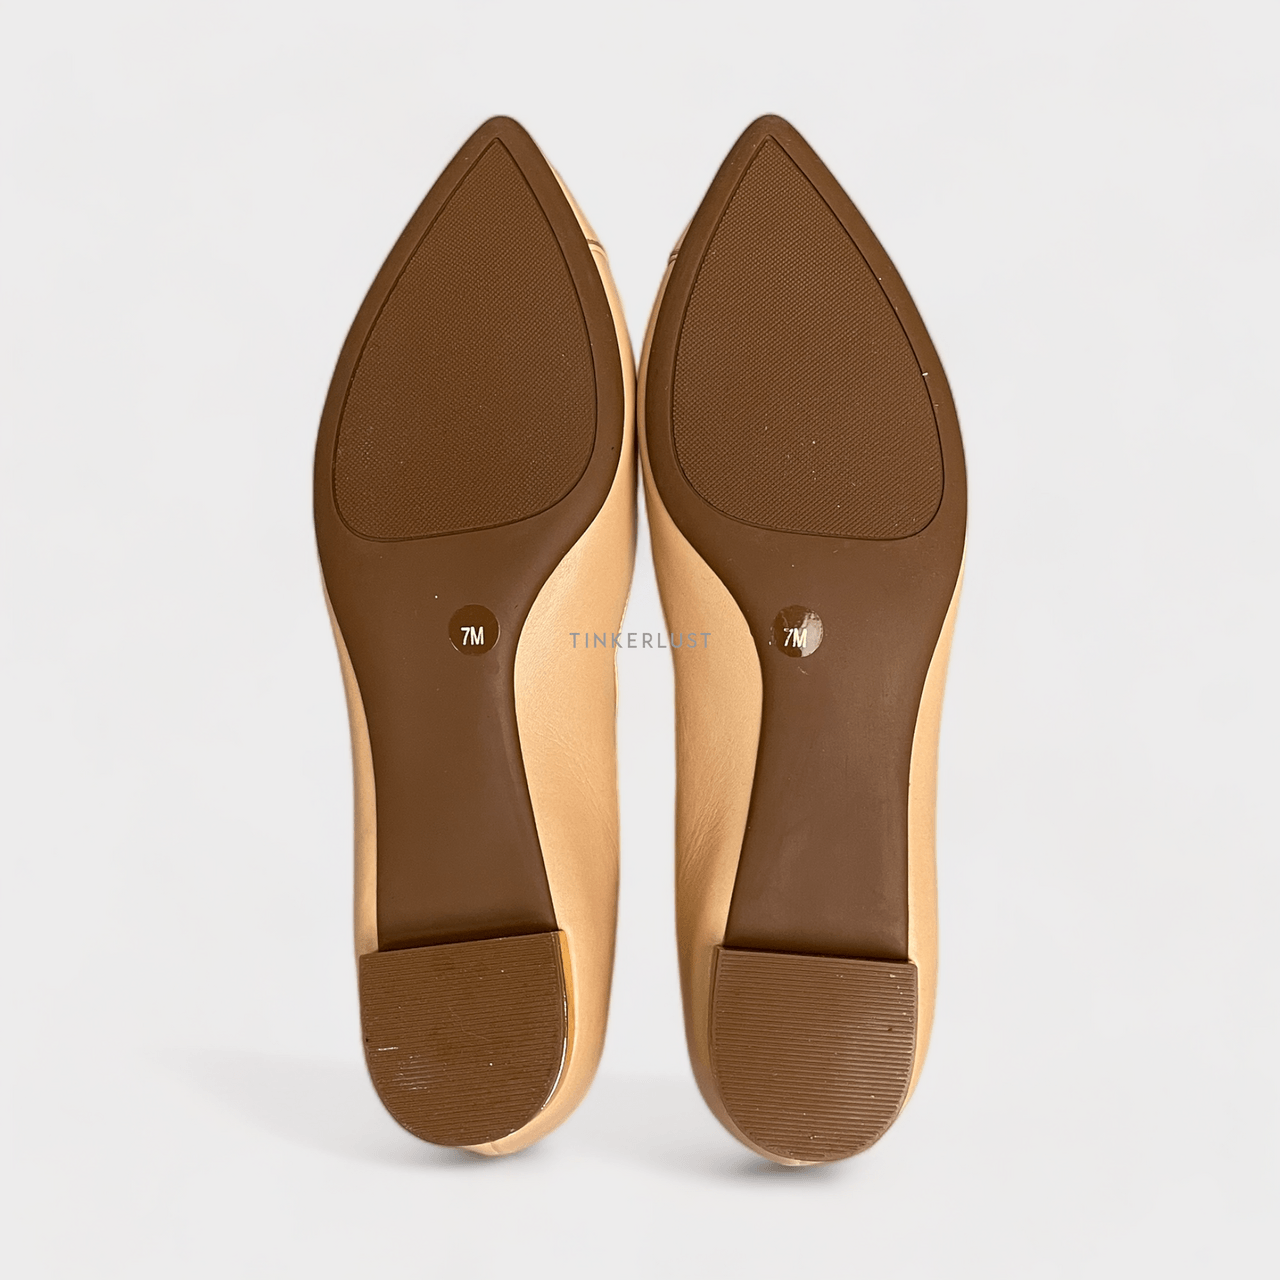 Tory Burch Darley Pointed Toe Nude Leather Flats